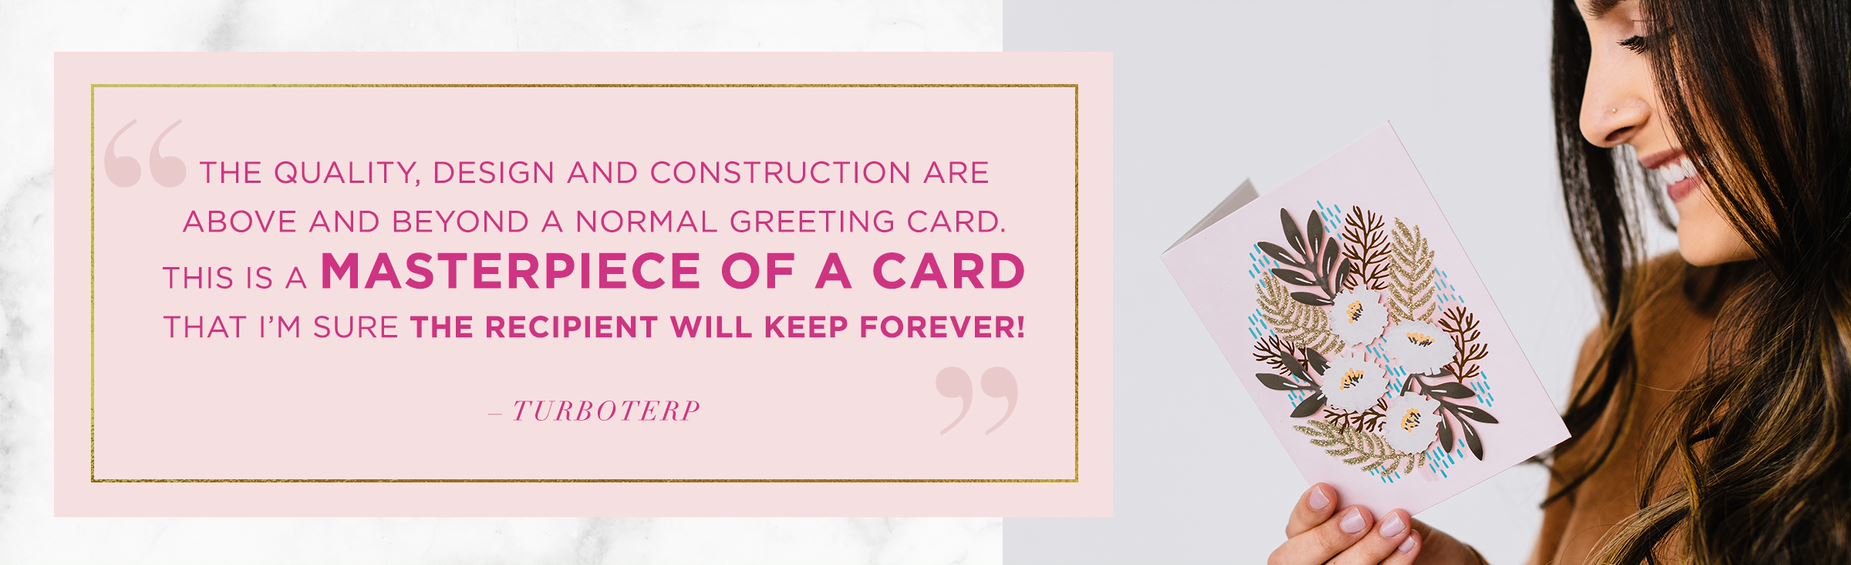 The quality, design and construction are above and beyond a normal greeting card. This is a masterpiece of a card that I am sure the recipient will keep forever